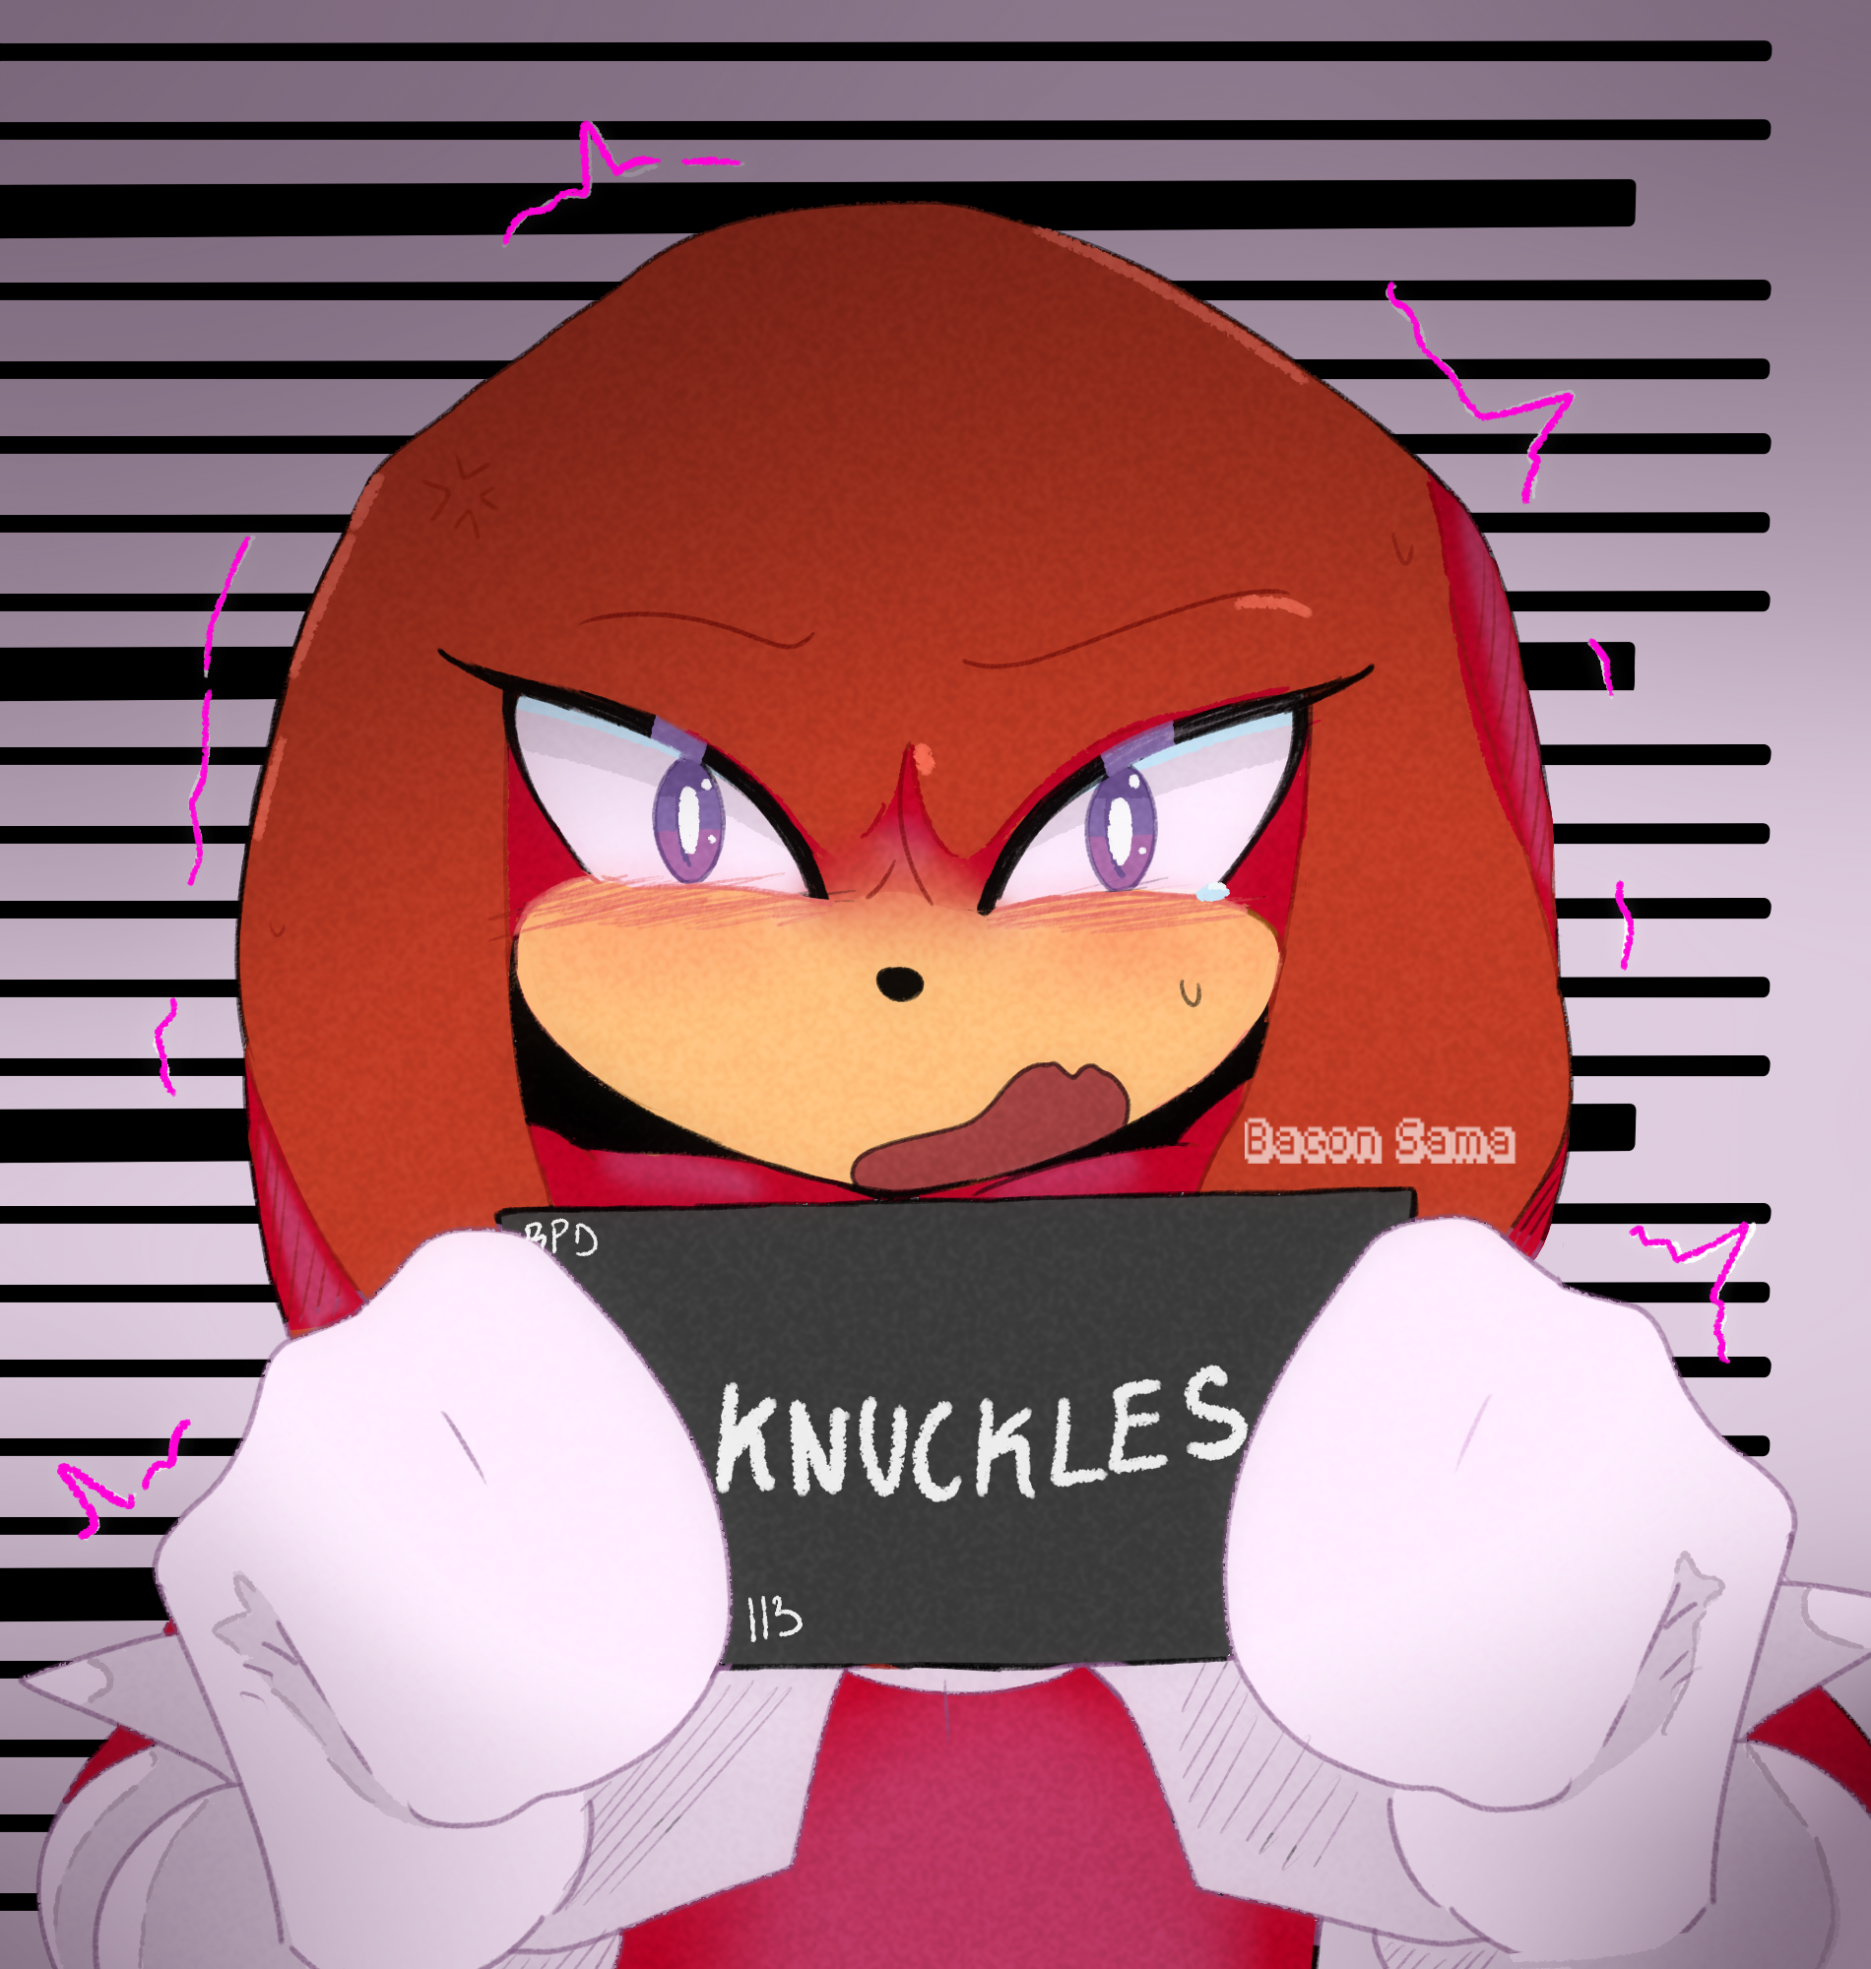 Knuckles the Echidna (human) by Artfrog75 on DeviantArt